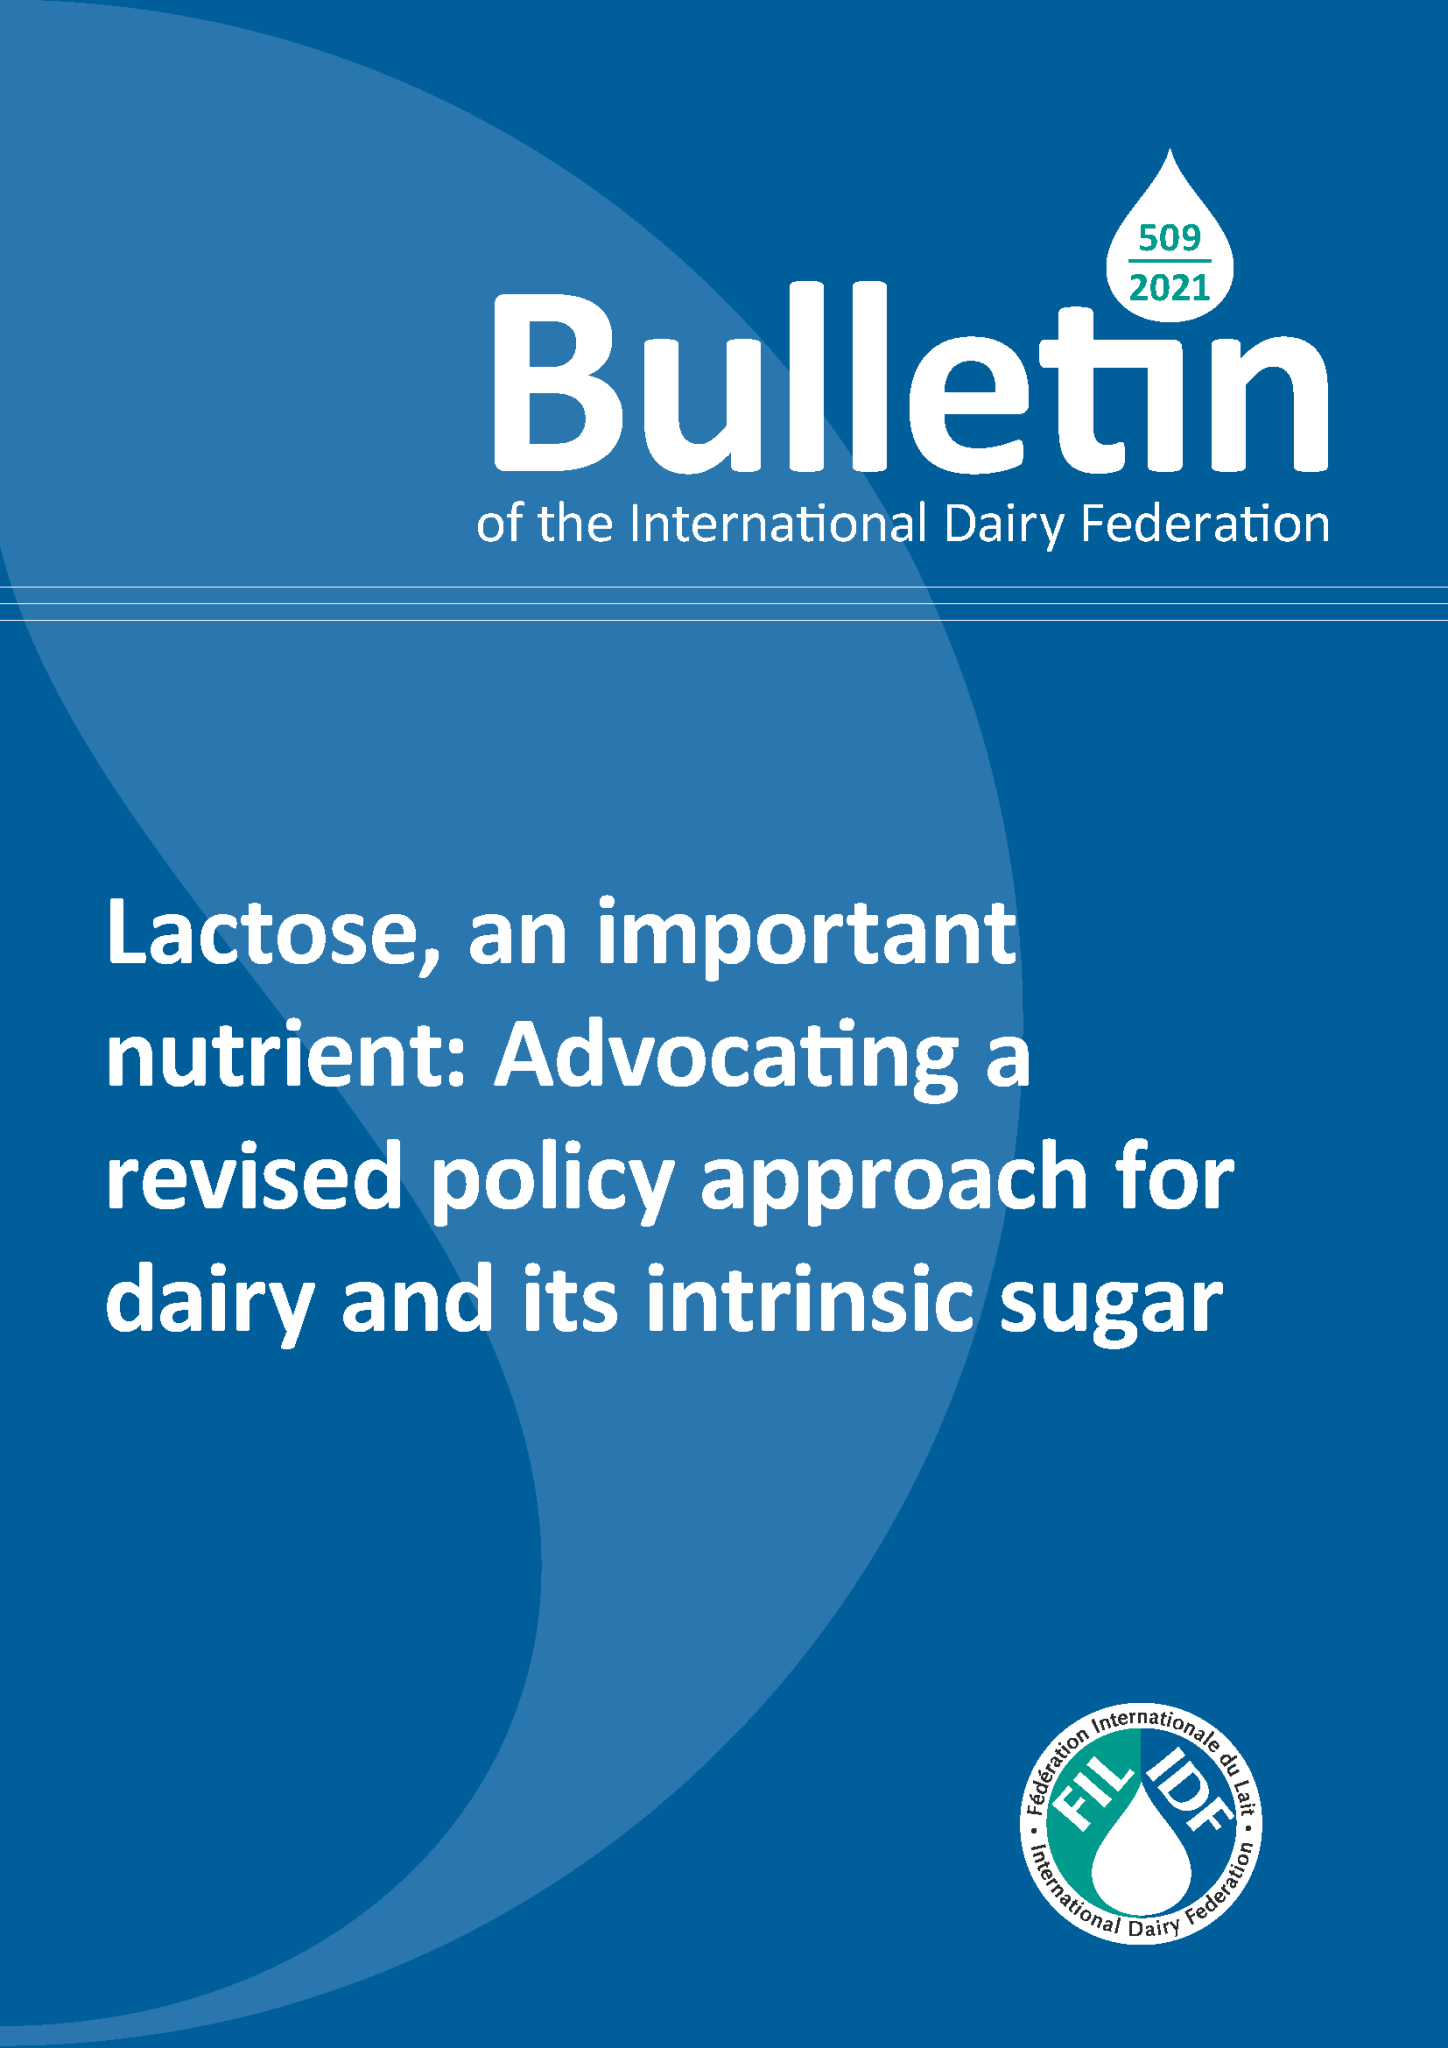 Bulletin of the IDF N° 509/2021: Lactose, an important nutrient: Advocating a revised policy approach for dairy & its intrinsic sugar - FIL-IDF